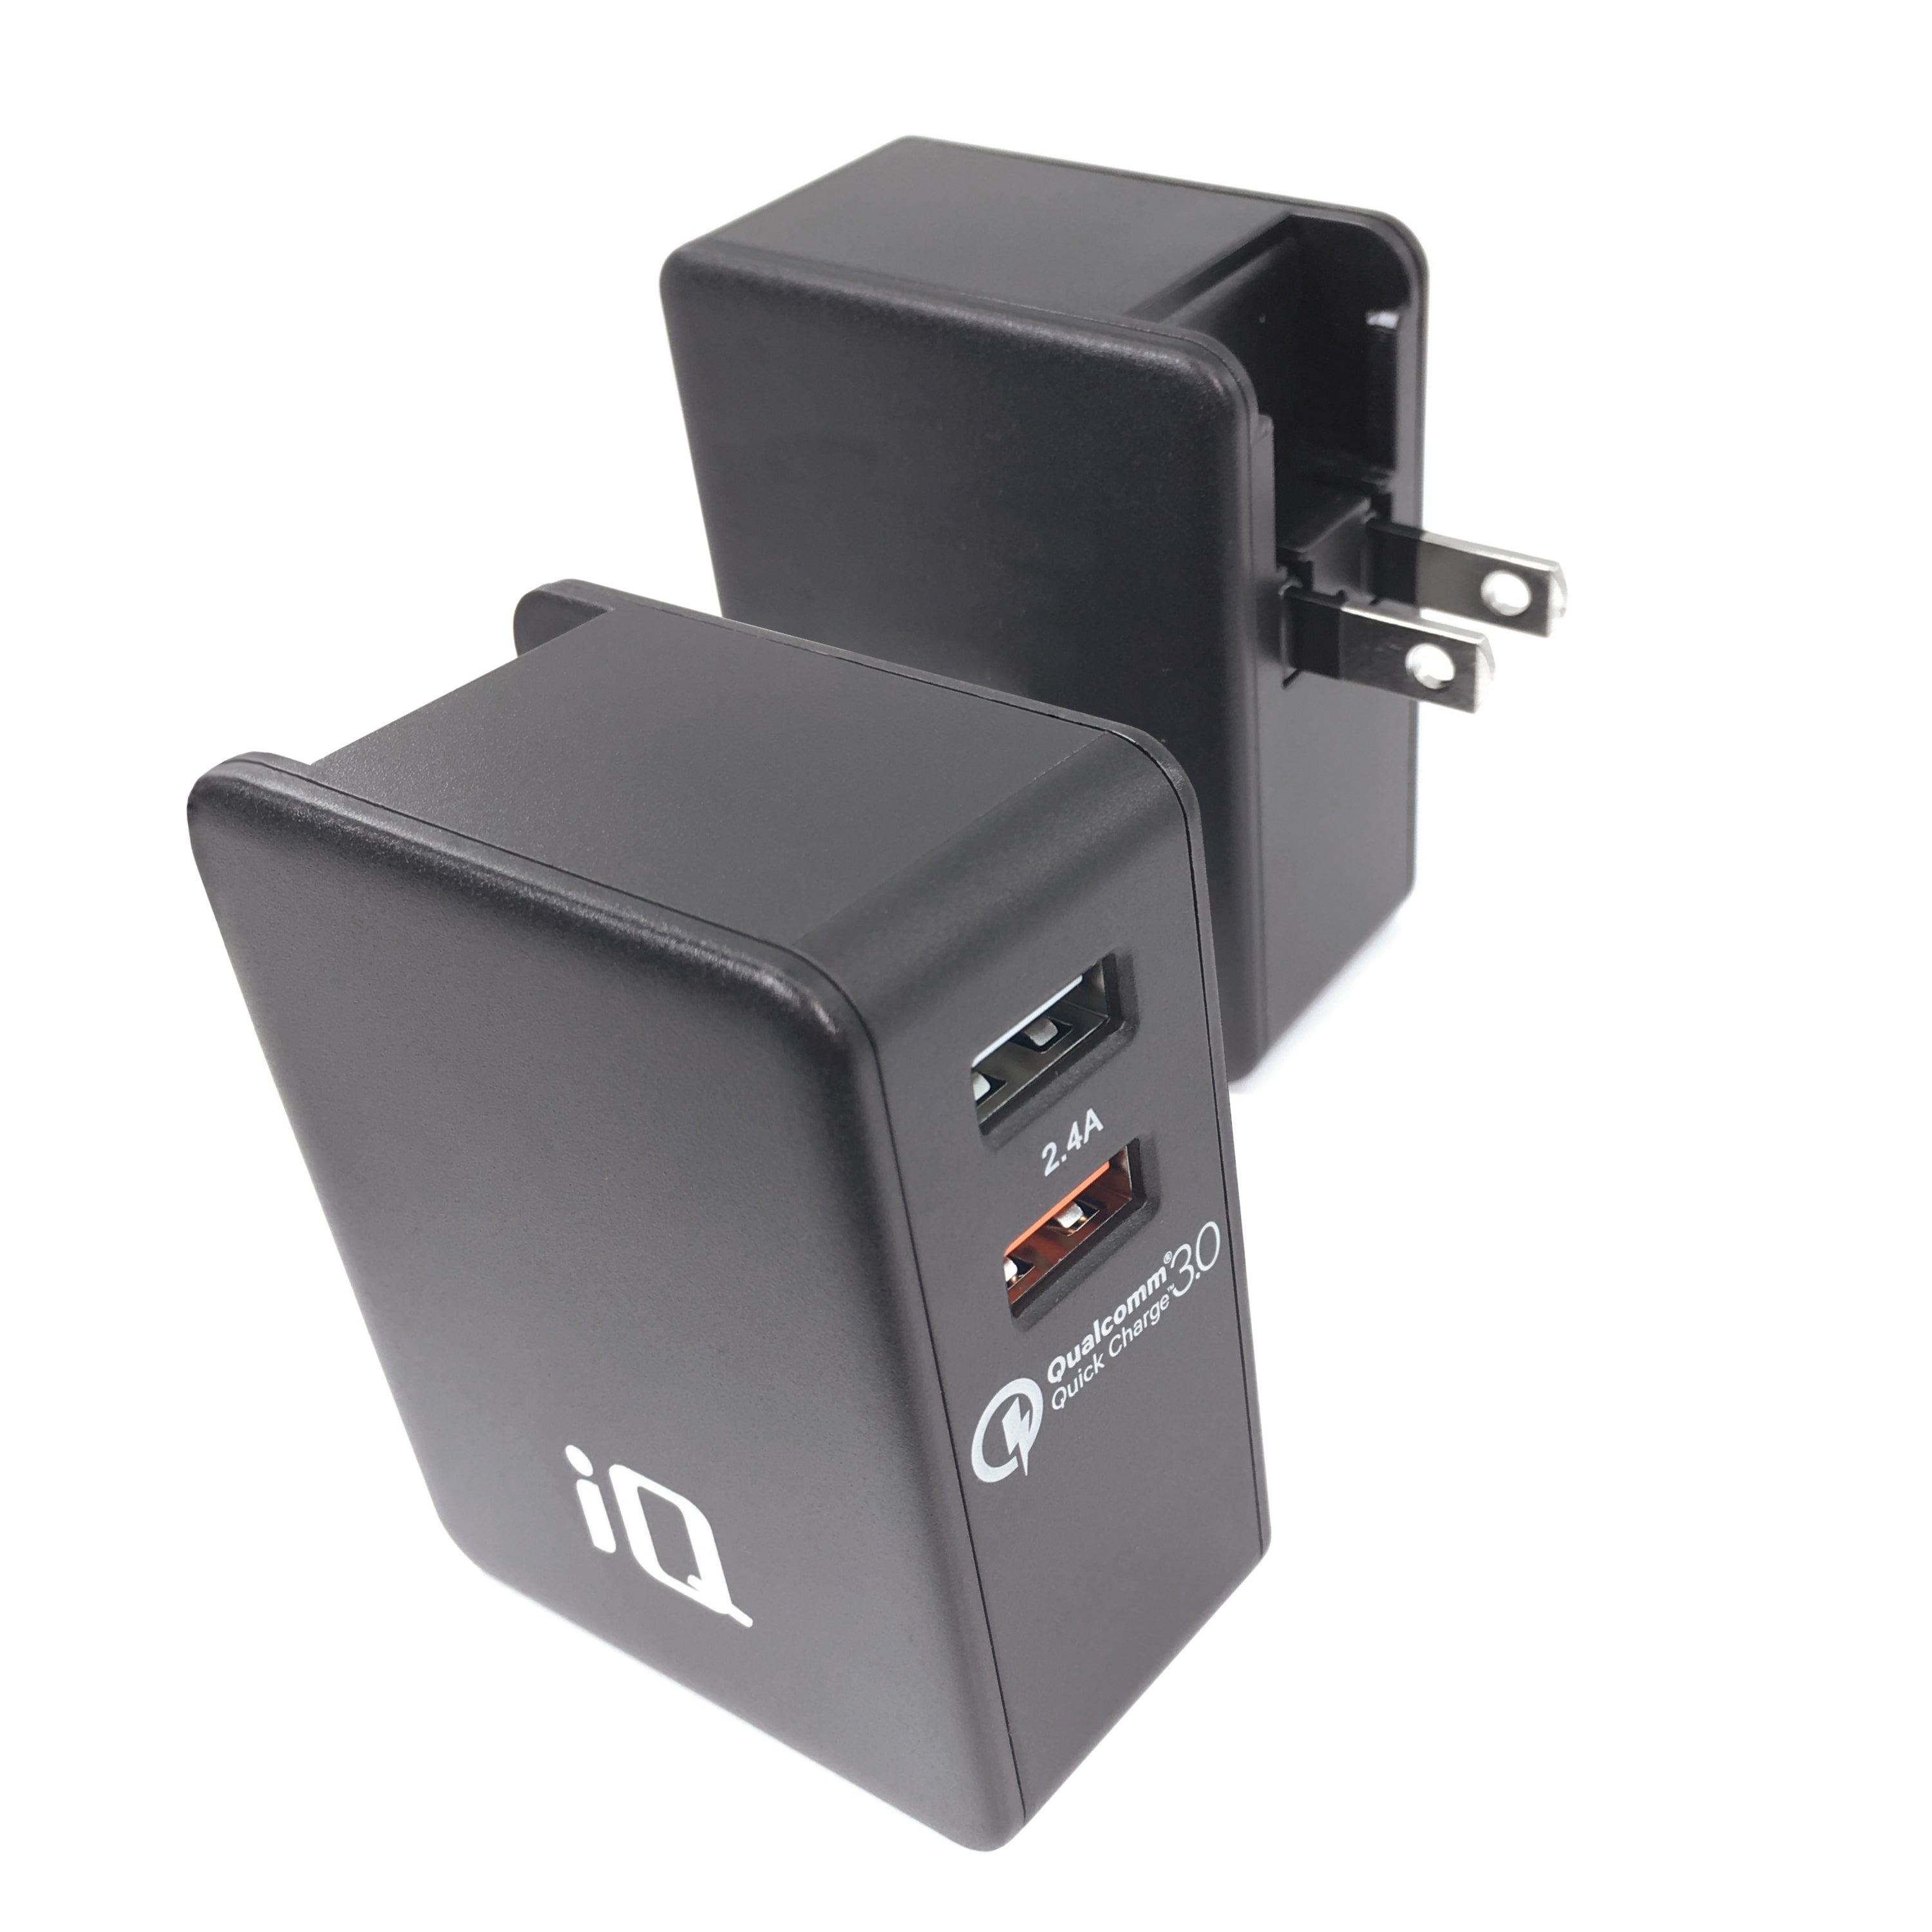 iQ QuickCharge 3.0 Wall Charger with 2.4A USB Port